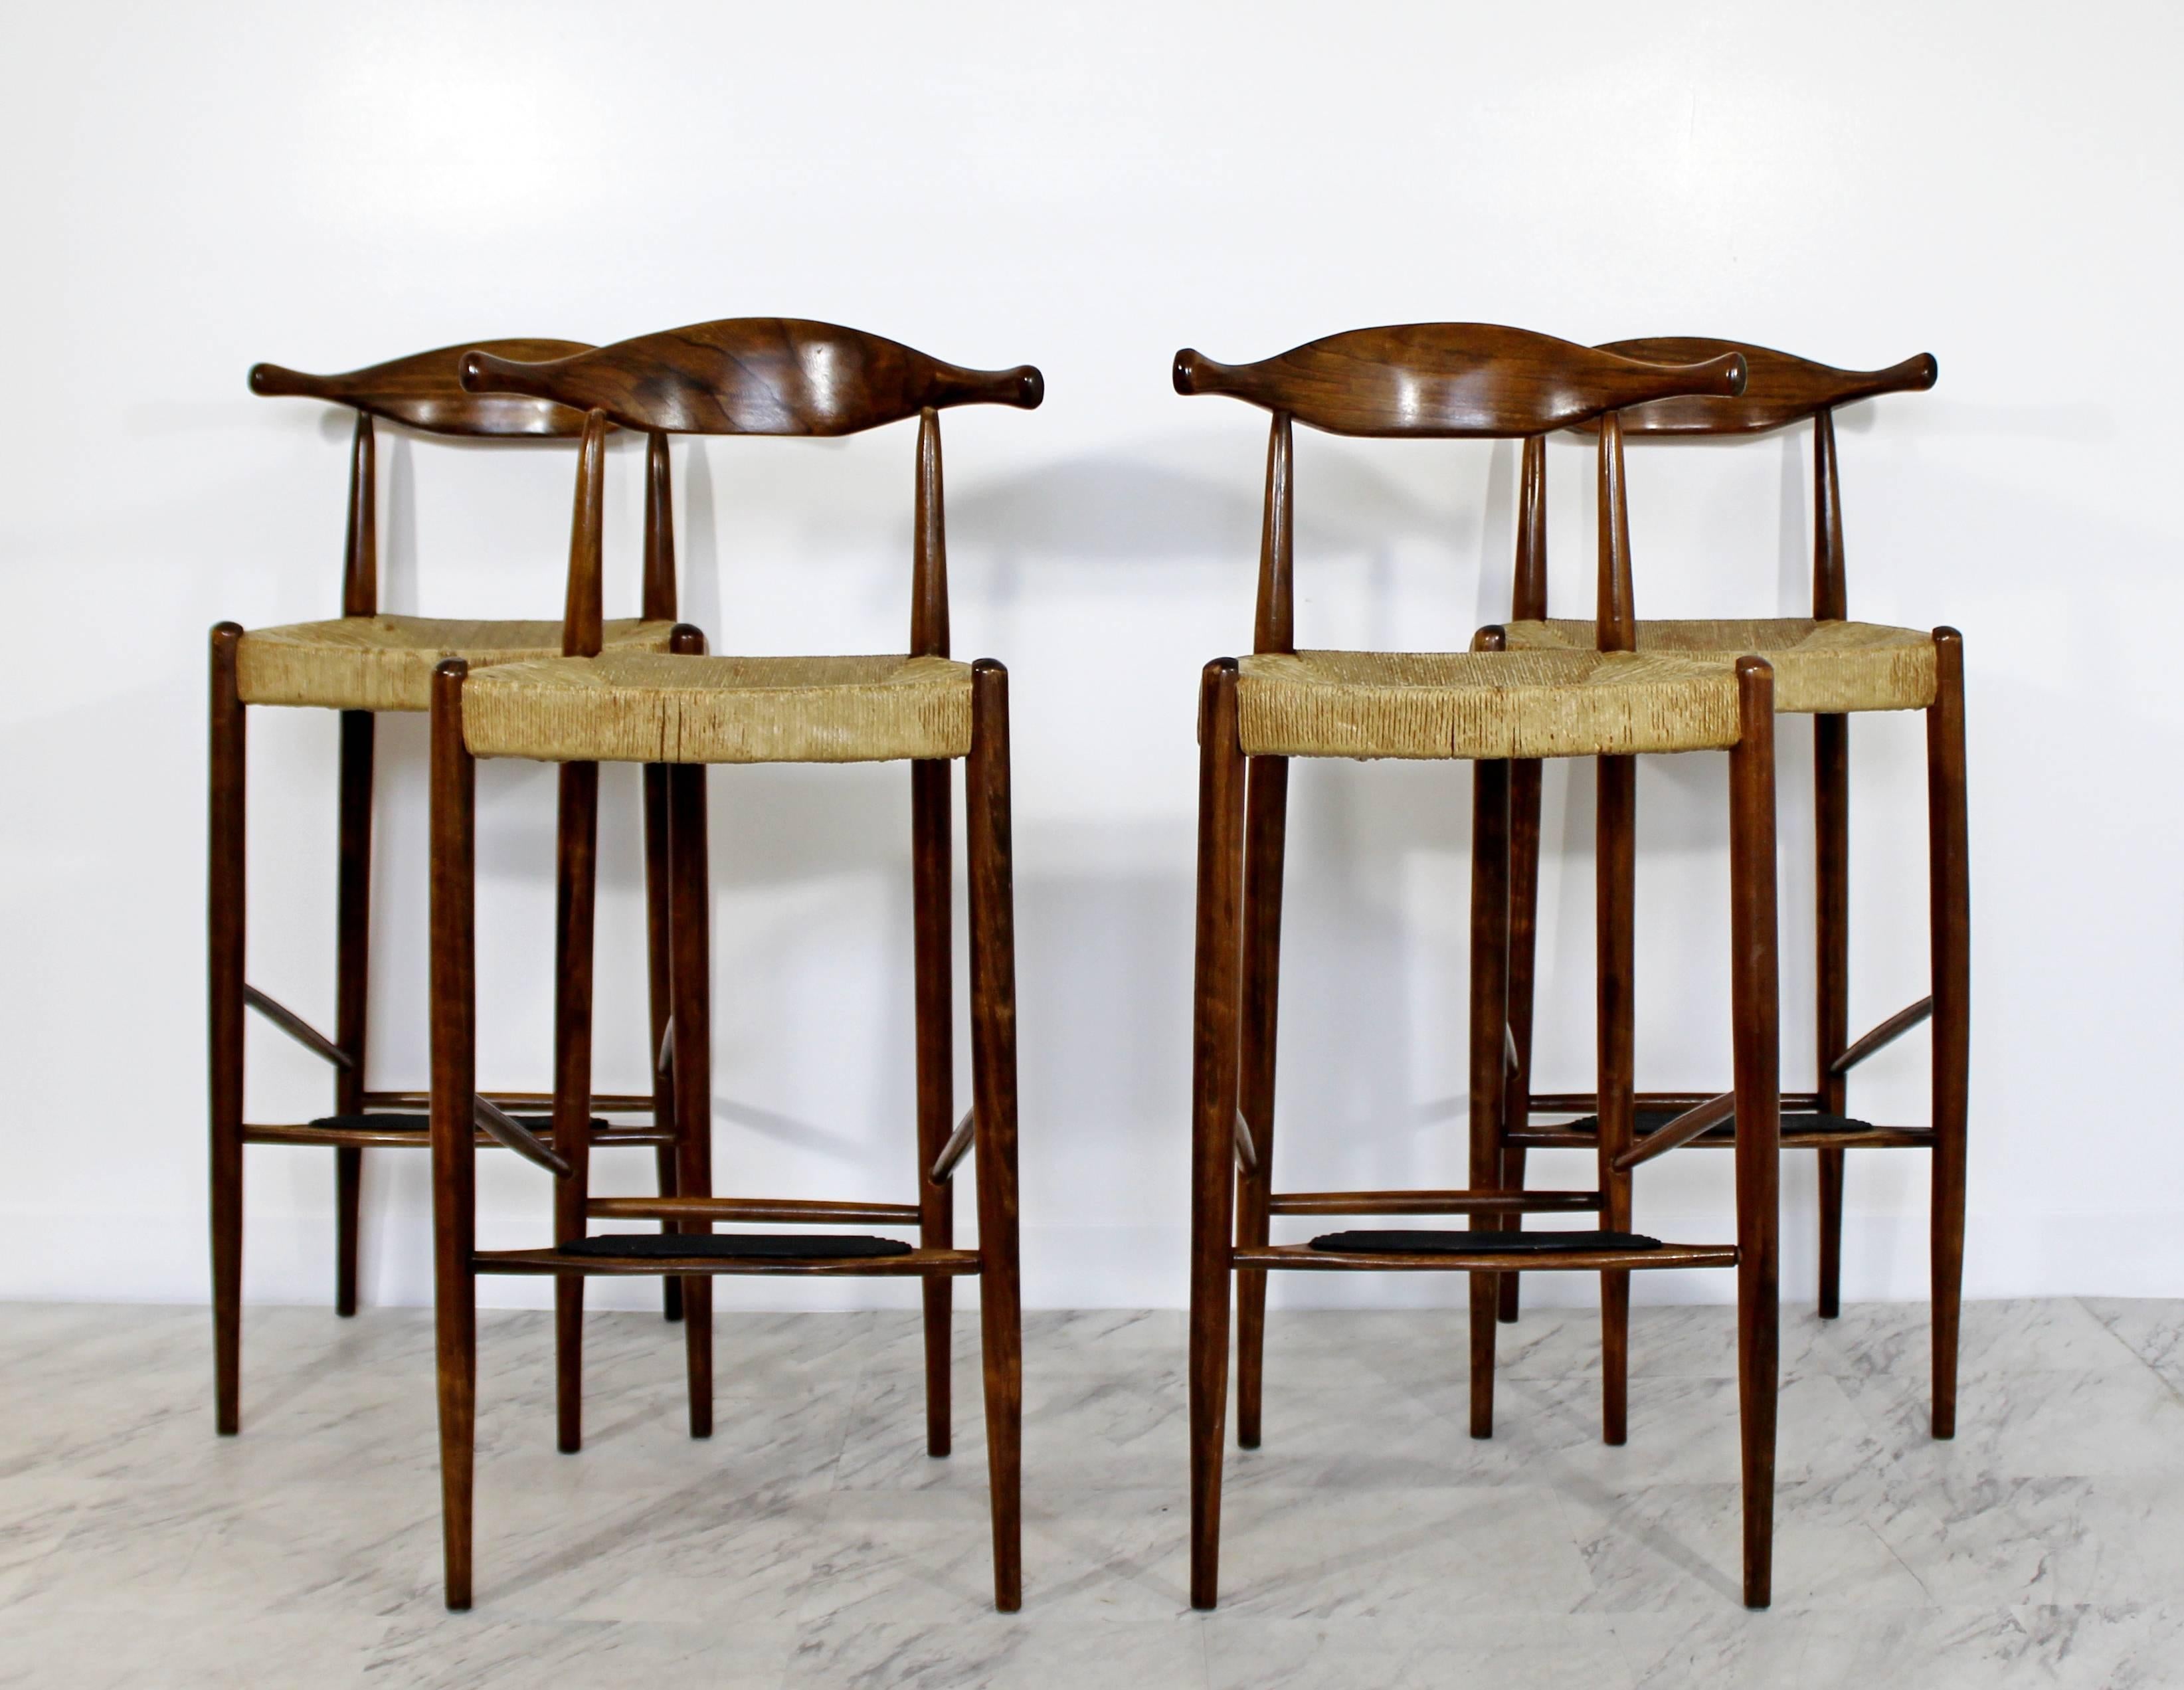 For your consideration is a wonderful set of four wicker rattan rush and teak wood bar stools, with curved backs, circa 1960s. By Hans Wegner called the horn stools. In good condition. The dimensions are 17